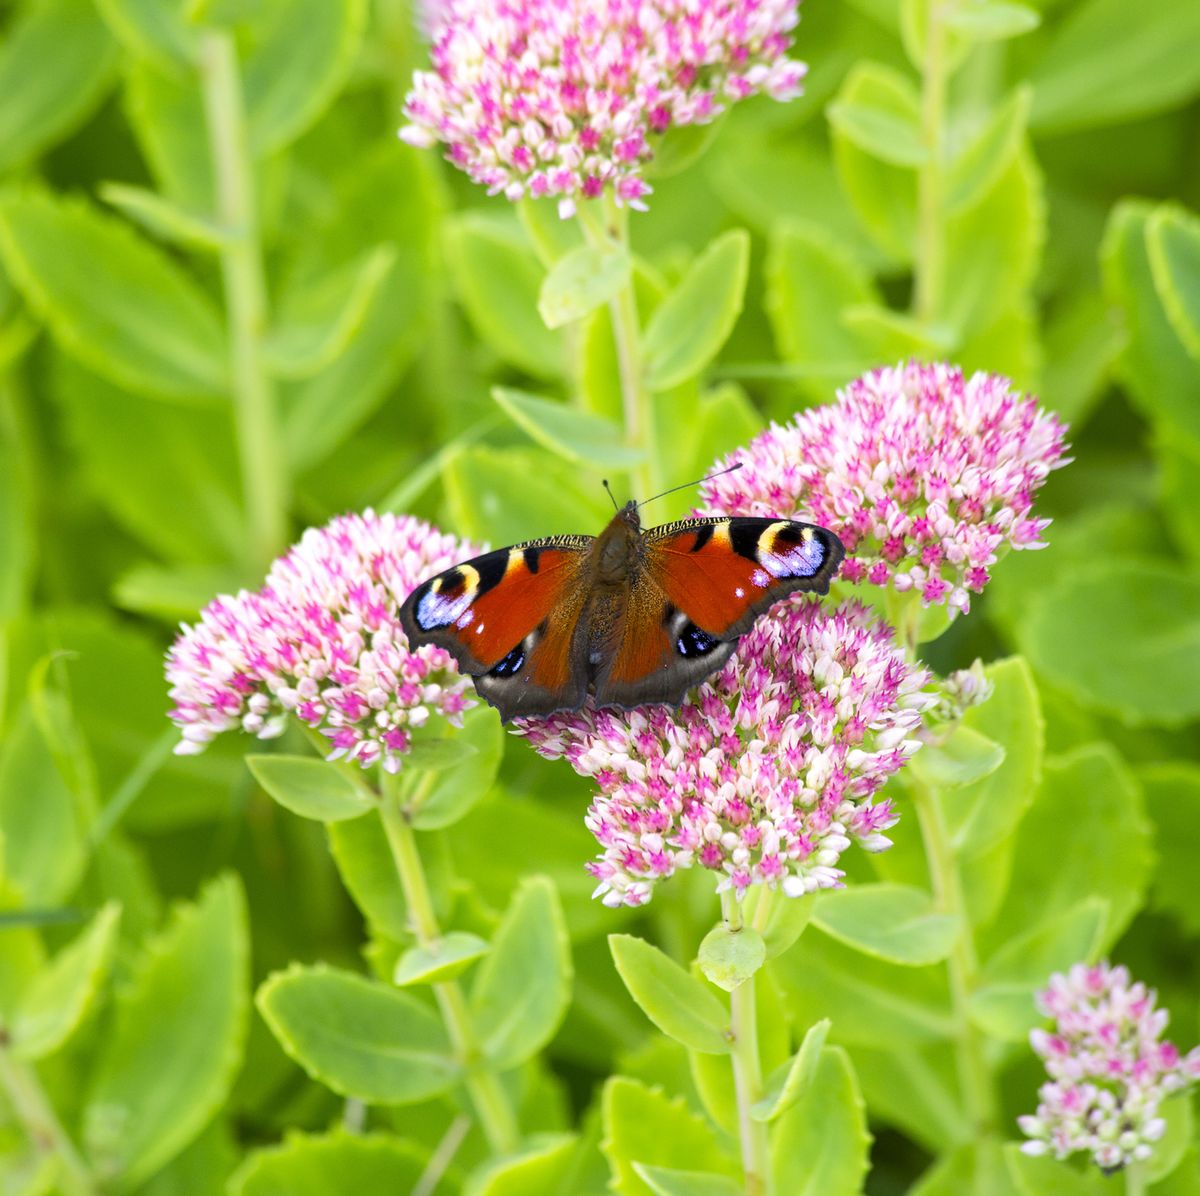 The Best Plants for Attracting Butterflies